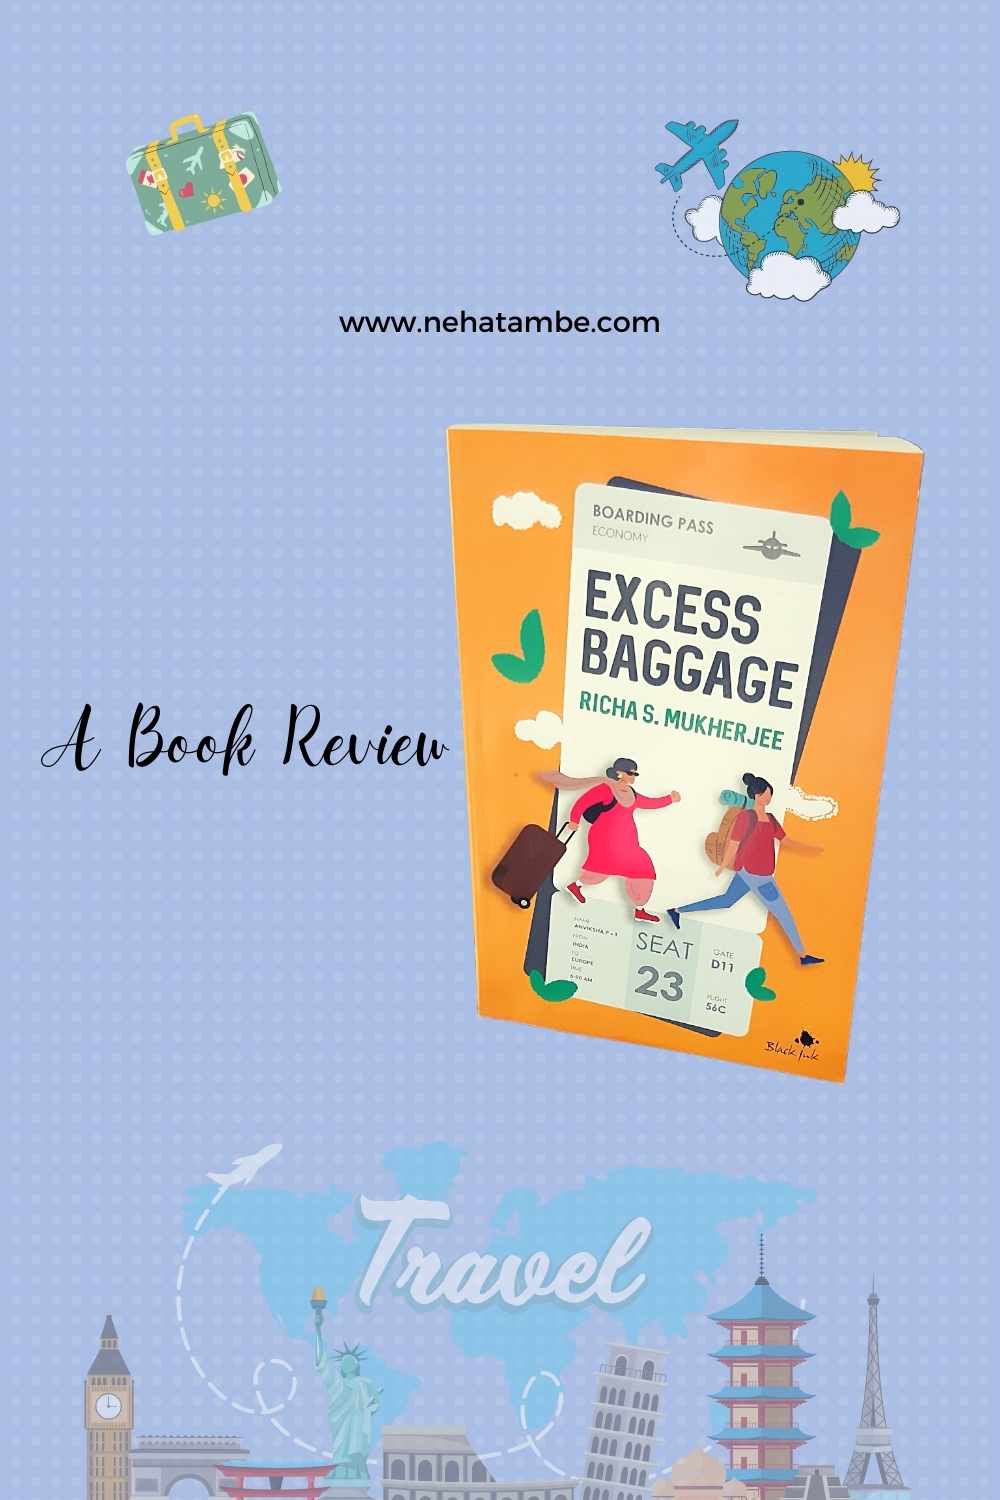 Book Review: Excess Baggage by Richa S Mukherjee